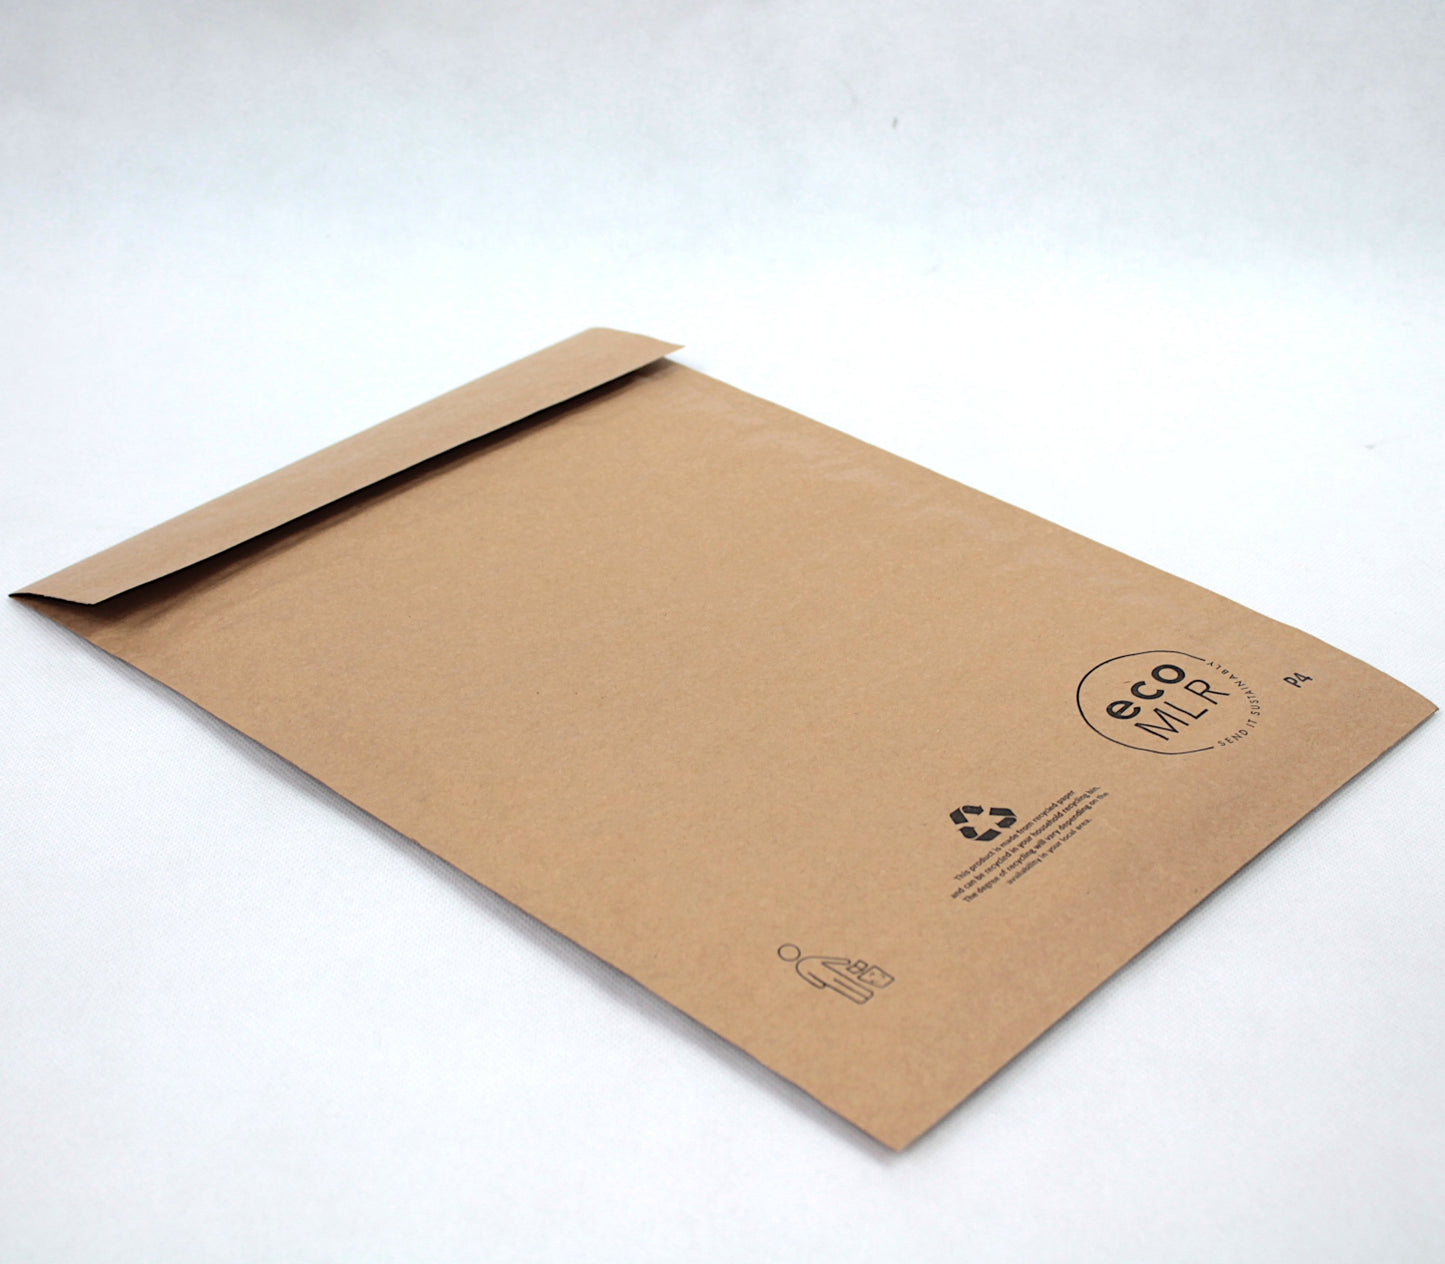 335x223mm Recyclable Padded Envelopes - Pack of 50